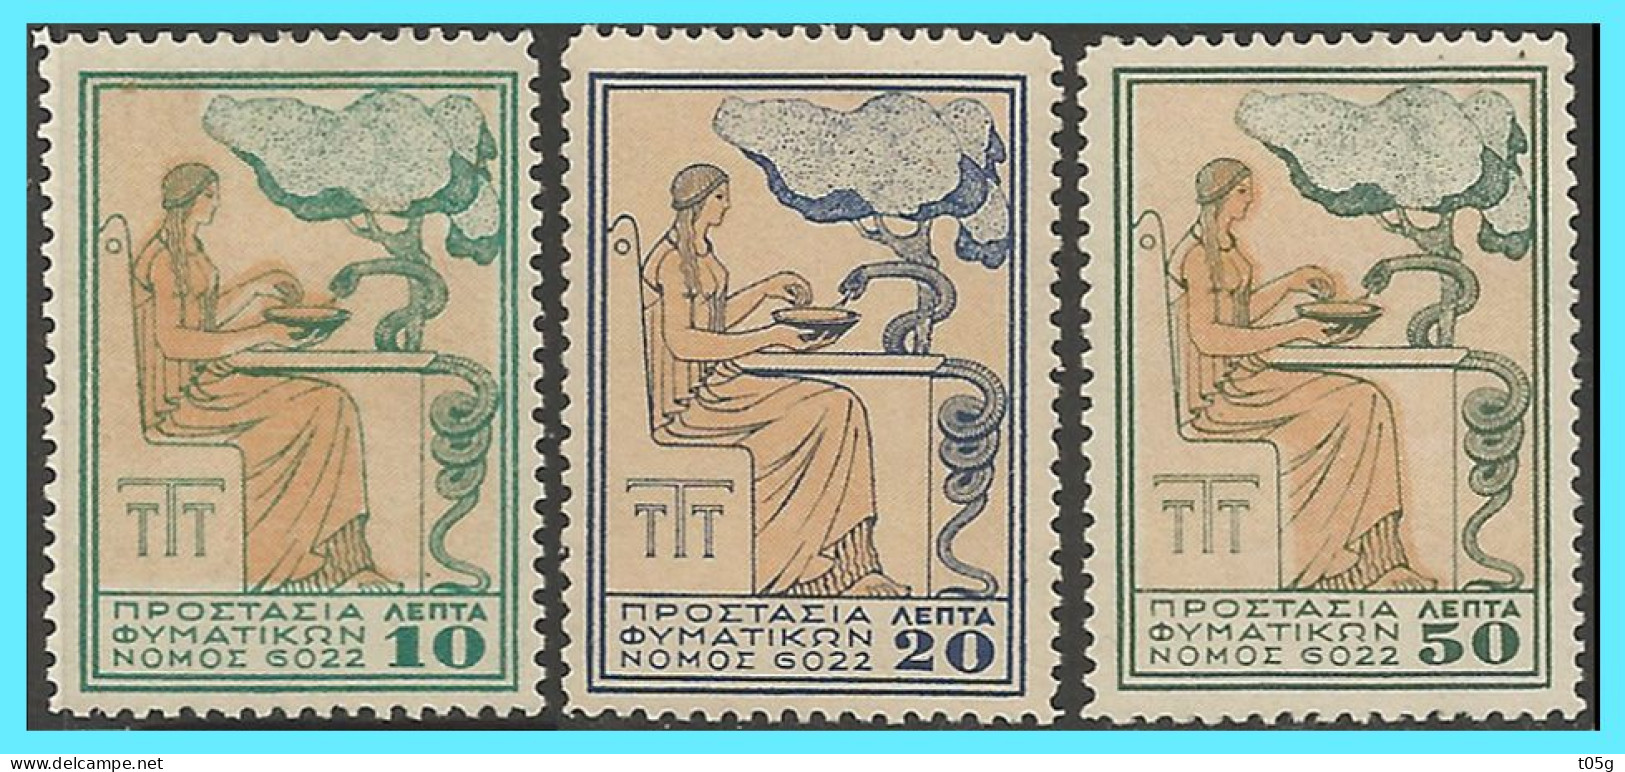 GREECE- GRECE - HELLAS CHARITY STAMPS 1934: "Protection For Tuberculosis Patients" Without " ELLAS Complet Set MNH** - Liefdadigheid